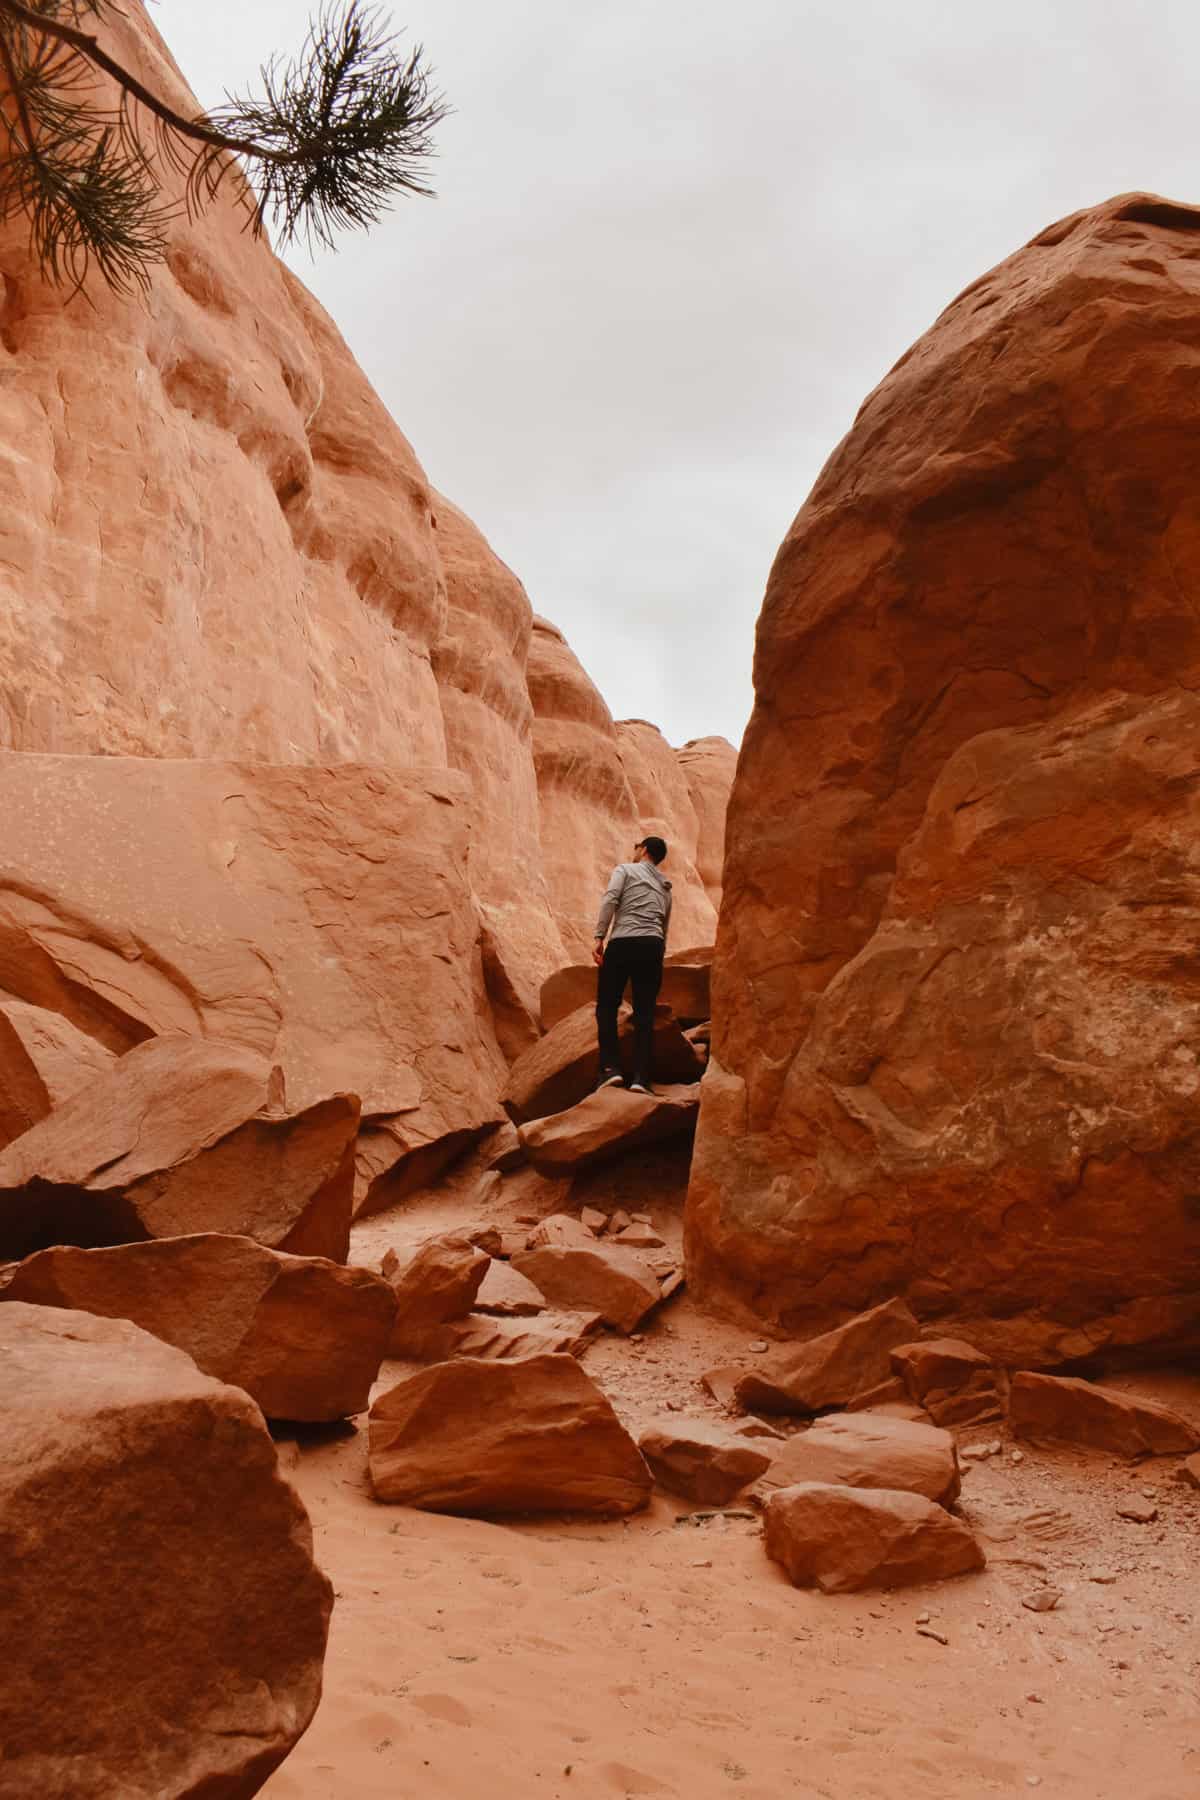 Sam discovering different paths at Arches National Park.